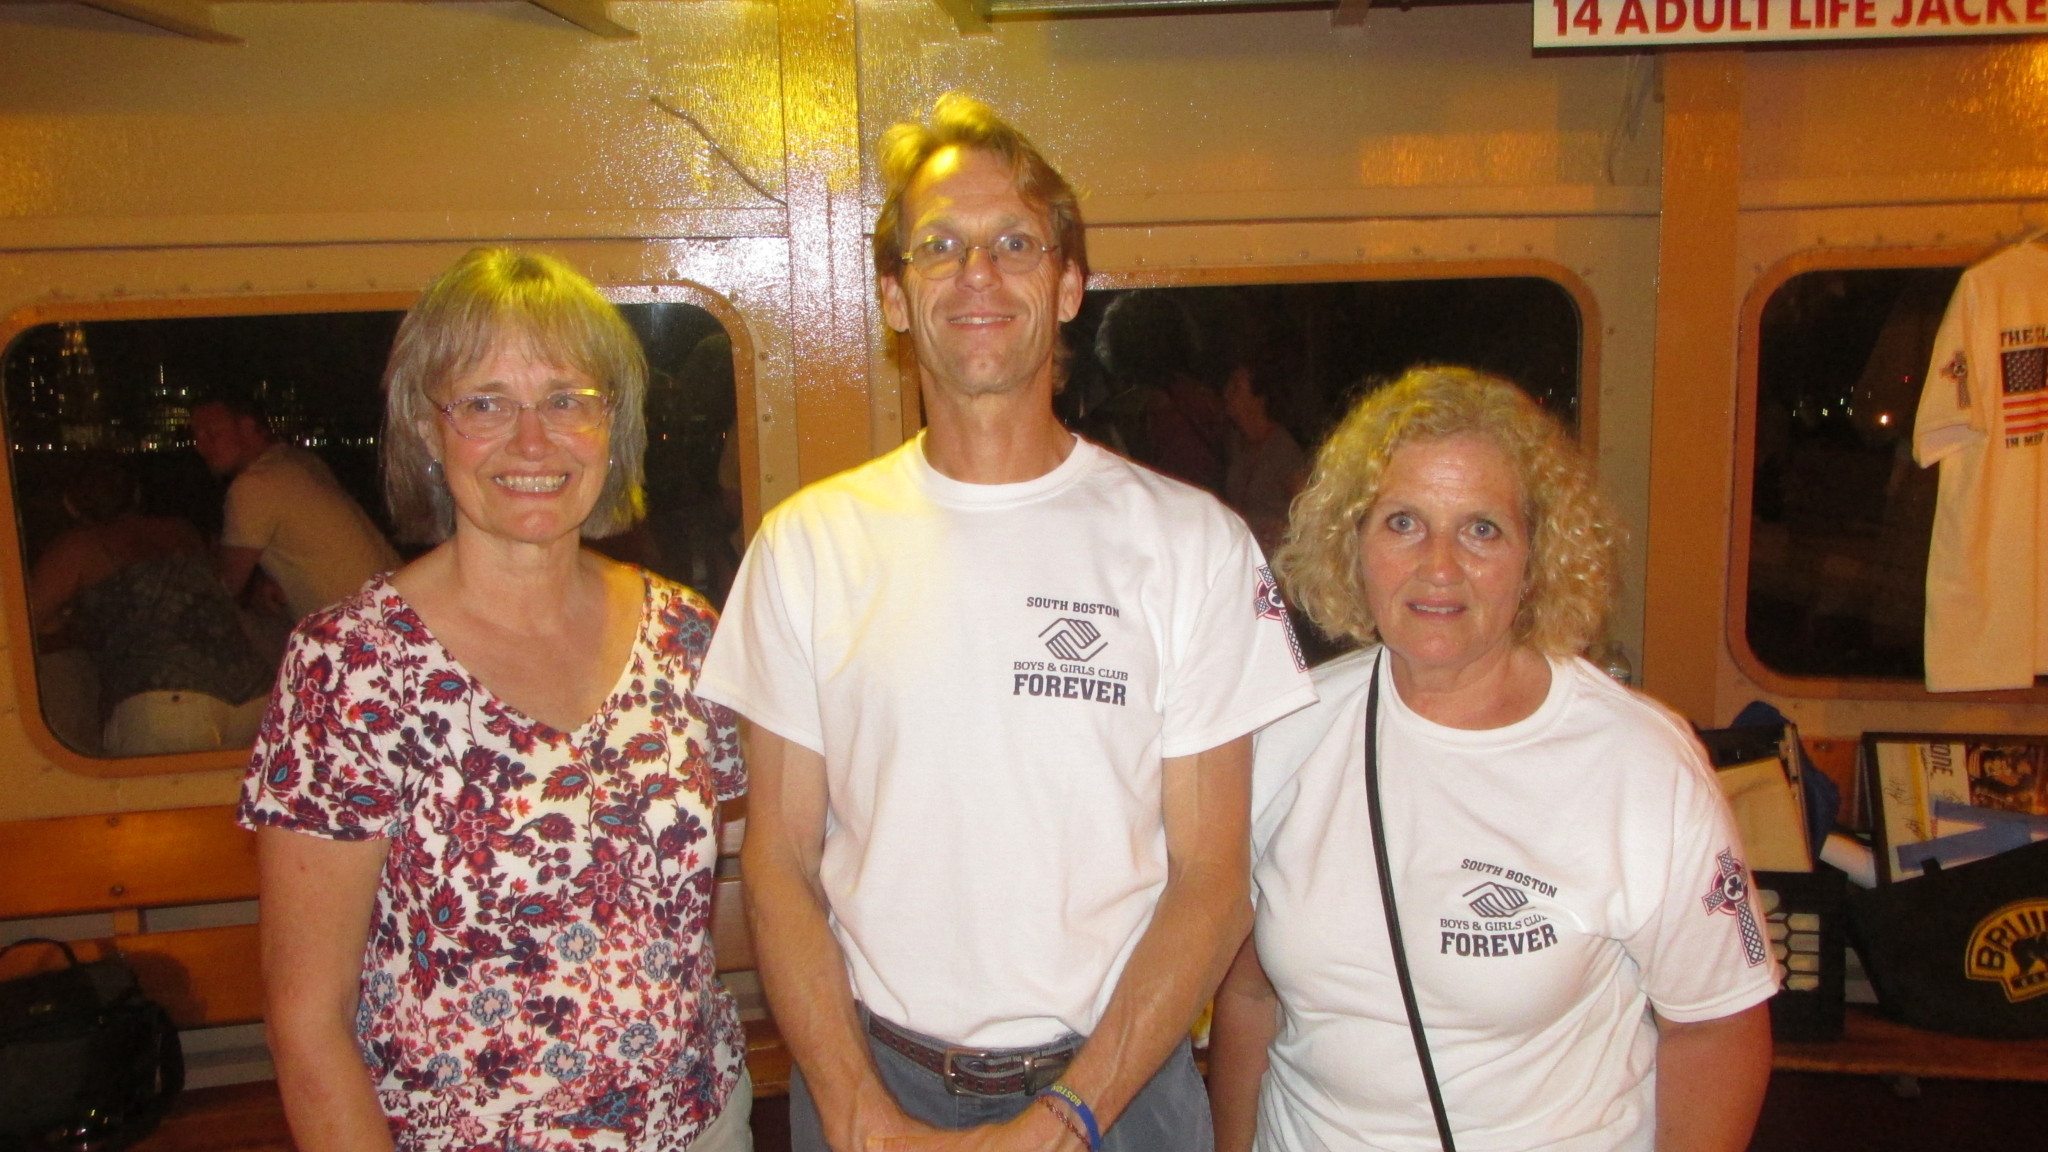 Three individuals on the 2016 Cruise, who make up the mind, heart, and soul of the Boys & Girls Club – Ann Gordon, Harry Duvall, and Pattie McCormick.